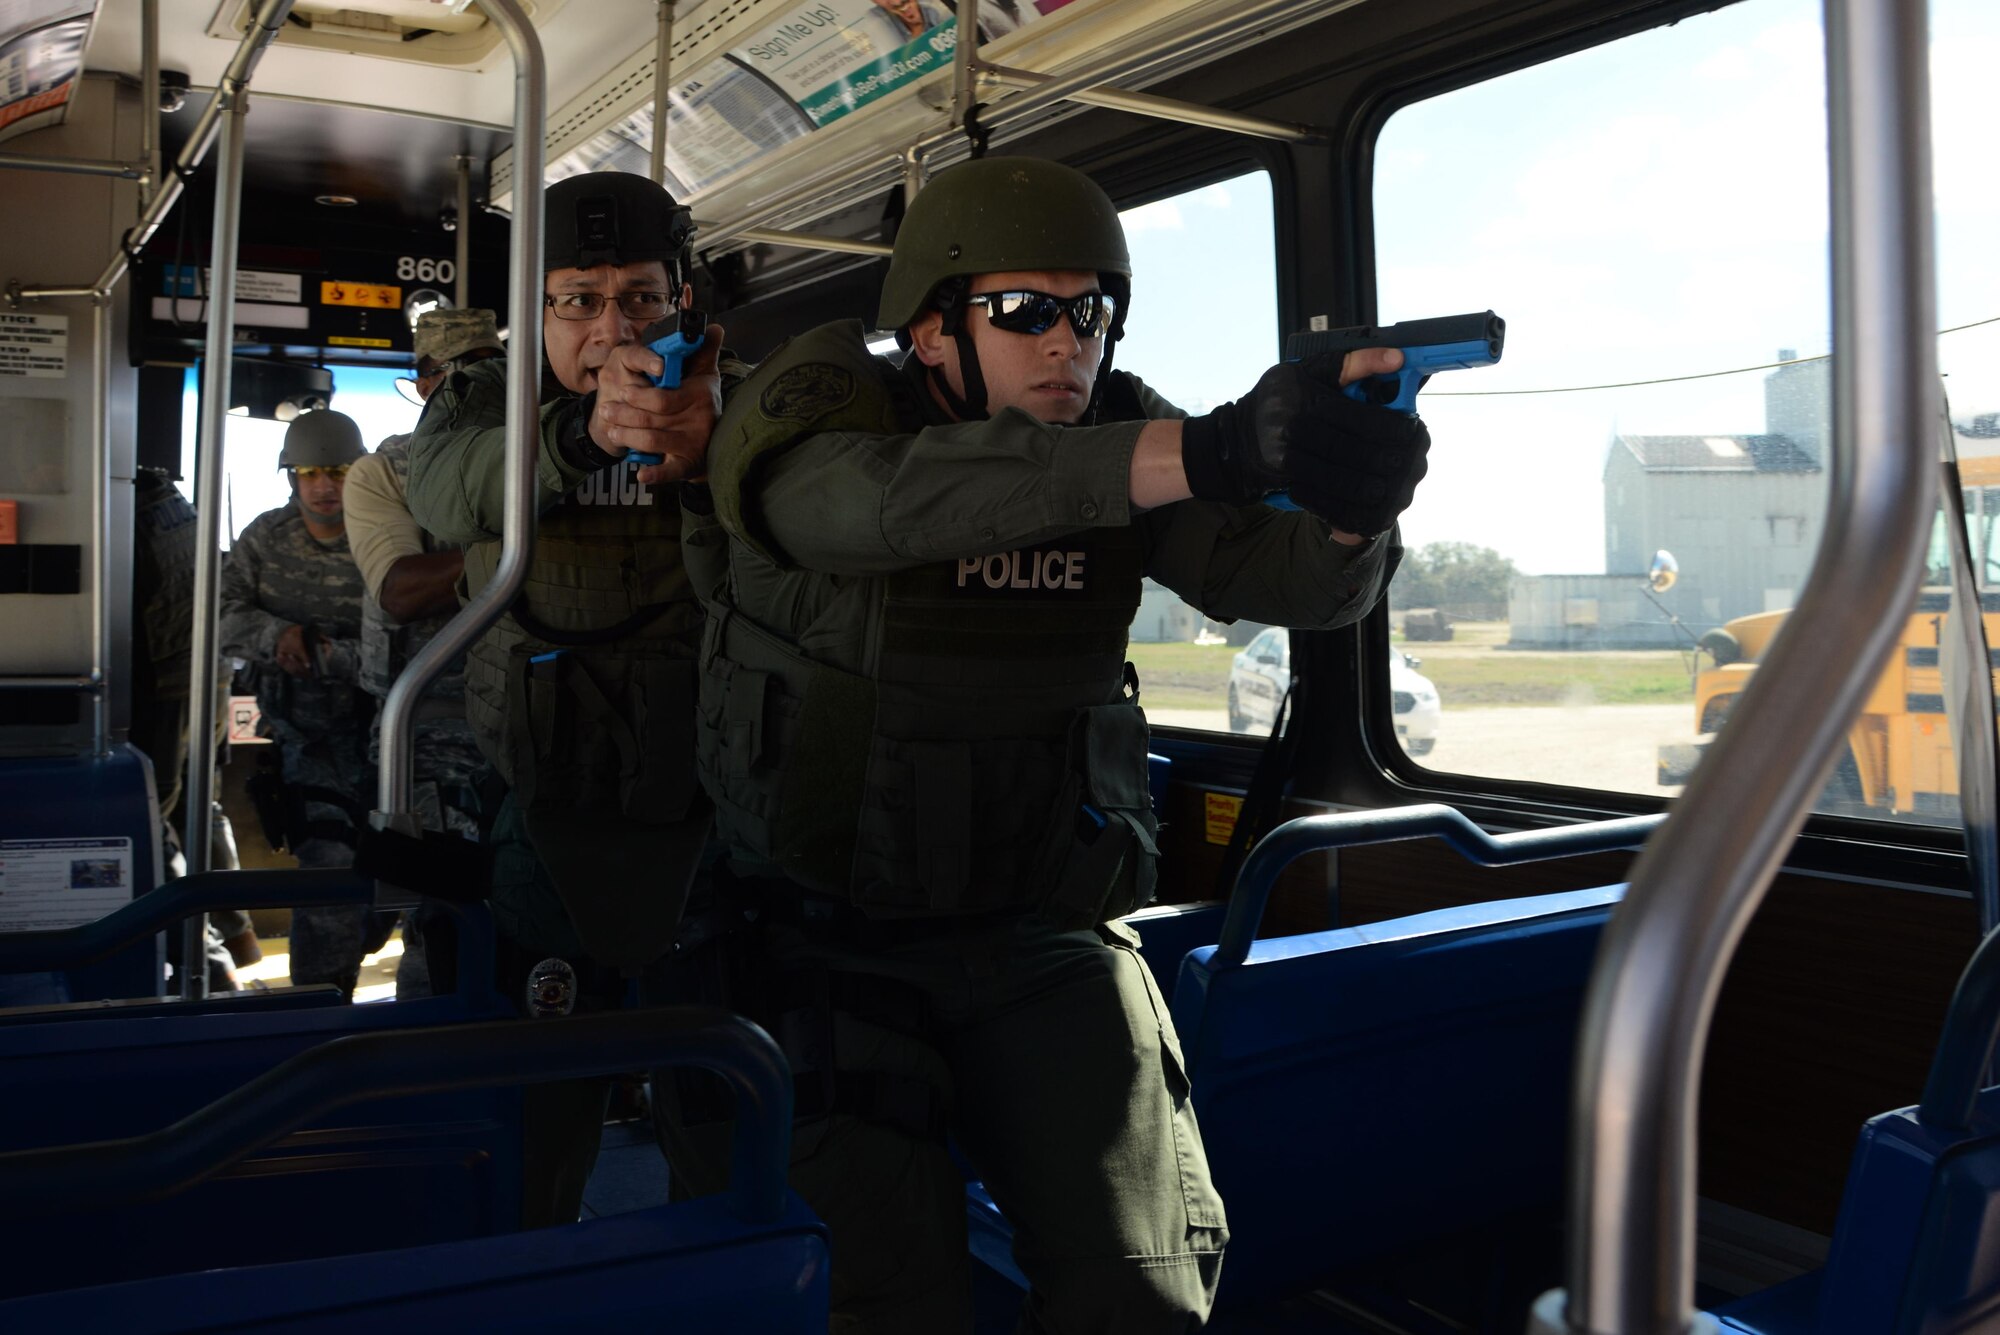 Officer John Salas, Judson Independent School District Police Department patrolman, and Officer Rich Radziski, Converse Police Department patrolman, board a city bus during a hostage rescue exercise Feb. 19, 2015 at Joint Base San Antonio-Randolph, Texas. The local agencies involved in the exercise were from the cities of Live, Oak Universal City and Converse and the Judson Independent School District Police Departments. Security Forces and local police departments trained together to prepare for emergencies that require both military and civilian response efforts. (U.S. Air Force photo by Airman 1st Class Stormy Archer)